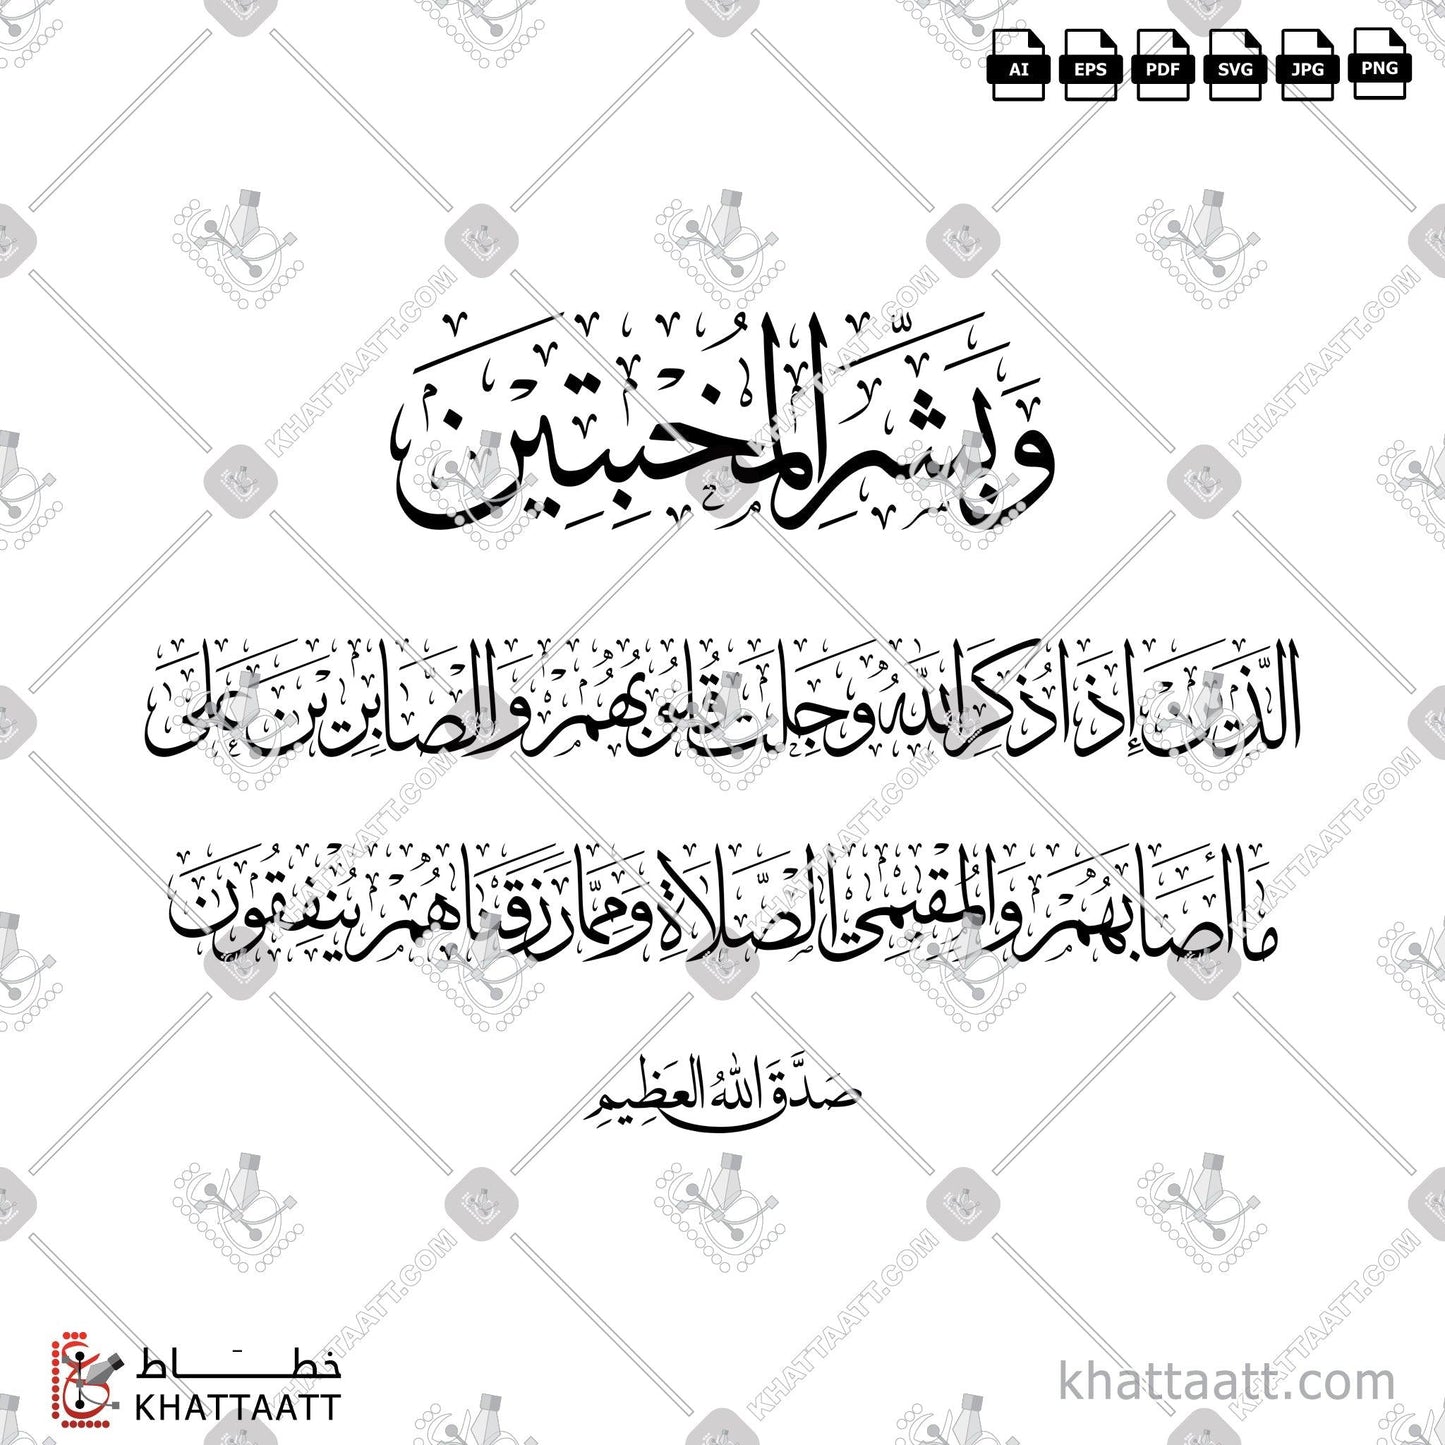 Download Arabic Calligraphy of وبشر المخبتين in Thuluth - خط الثلث in vector and .png